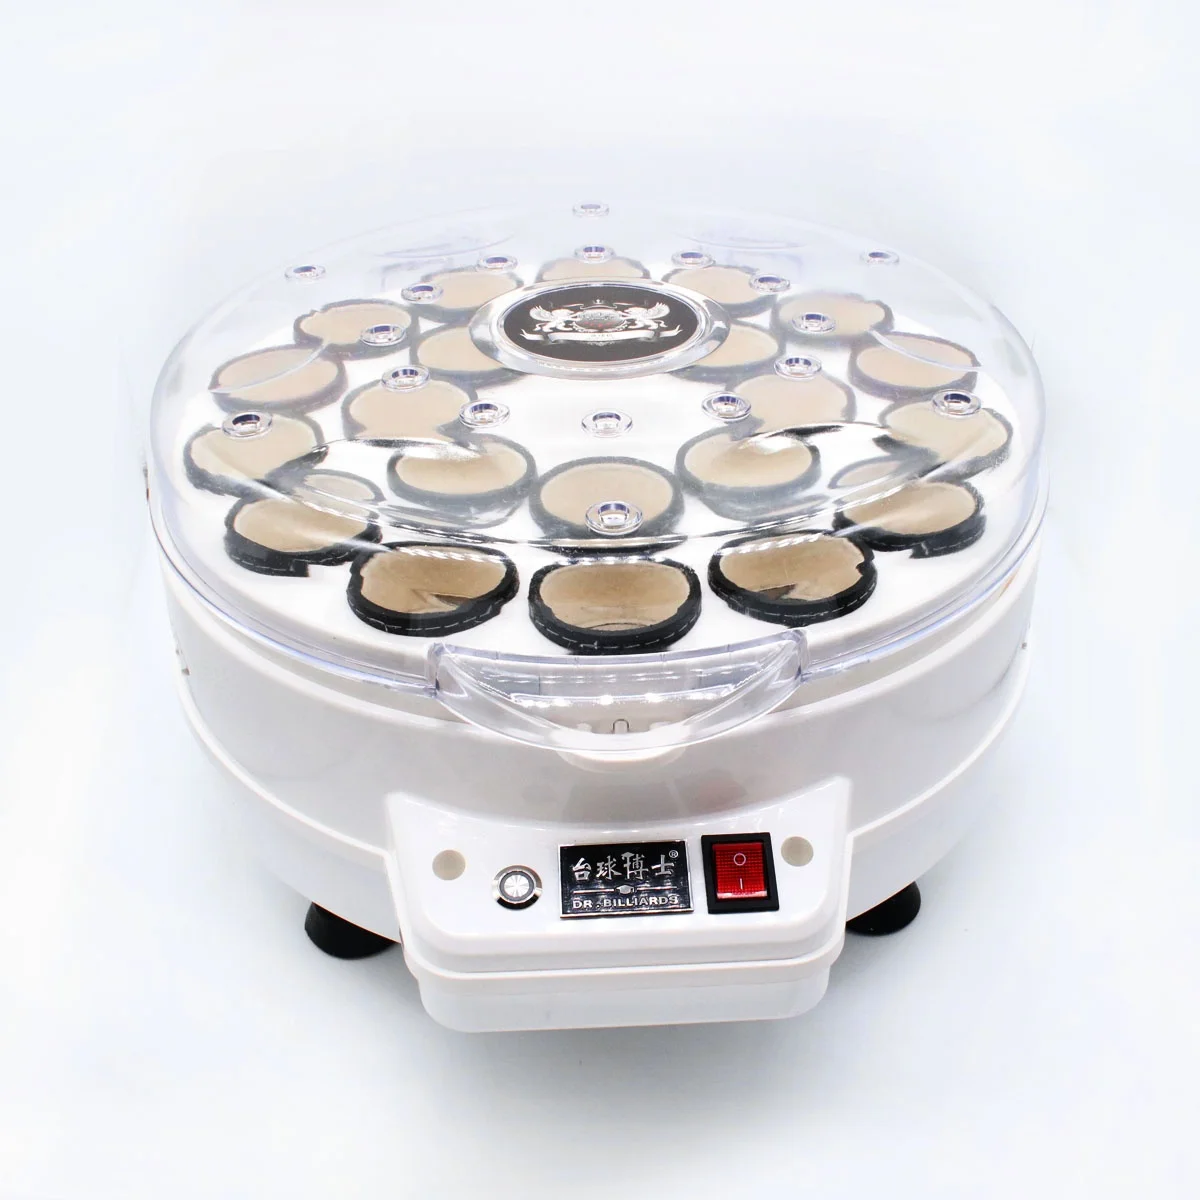 

Billiard 2-1/16" Snooker Balls Electronic Cleaner Washing Polisher Machine For 22 Holes, White